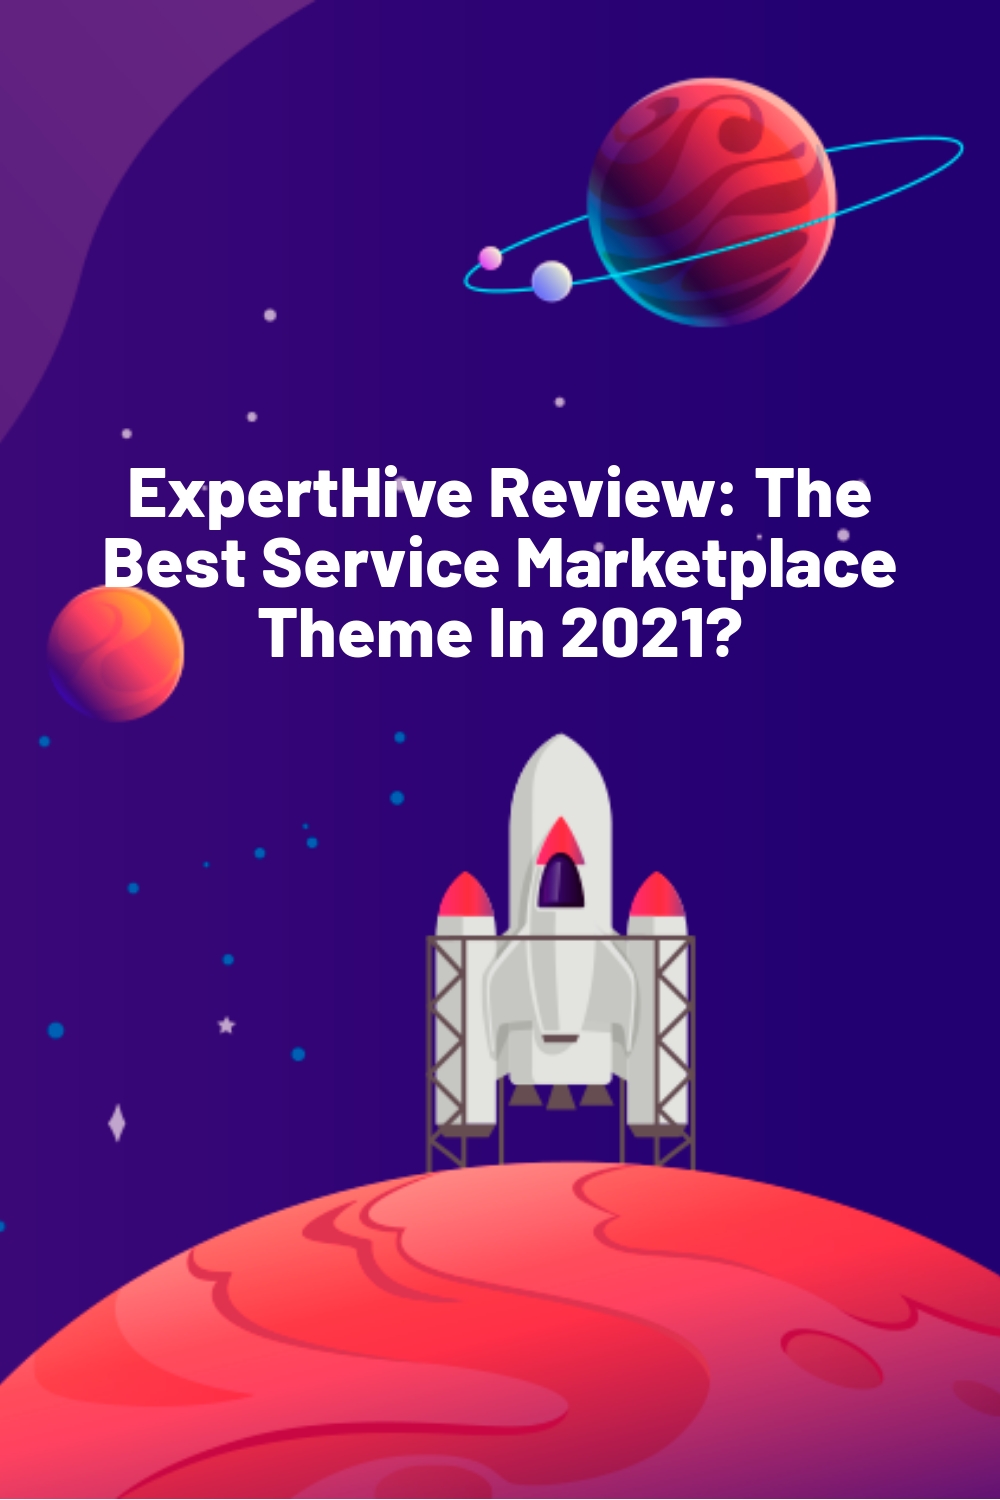 ExpertHive Review: The Best Service Marketplace Theme In 2021?